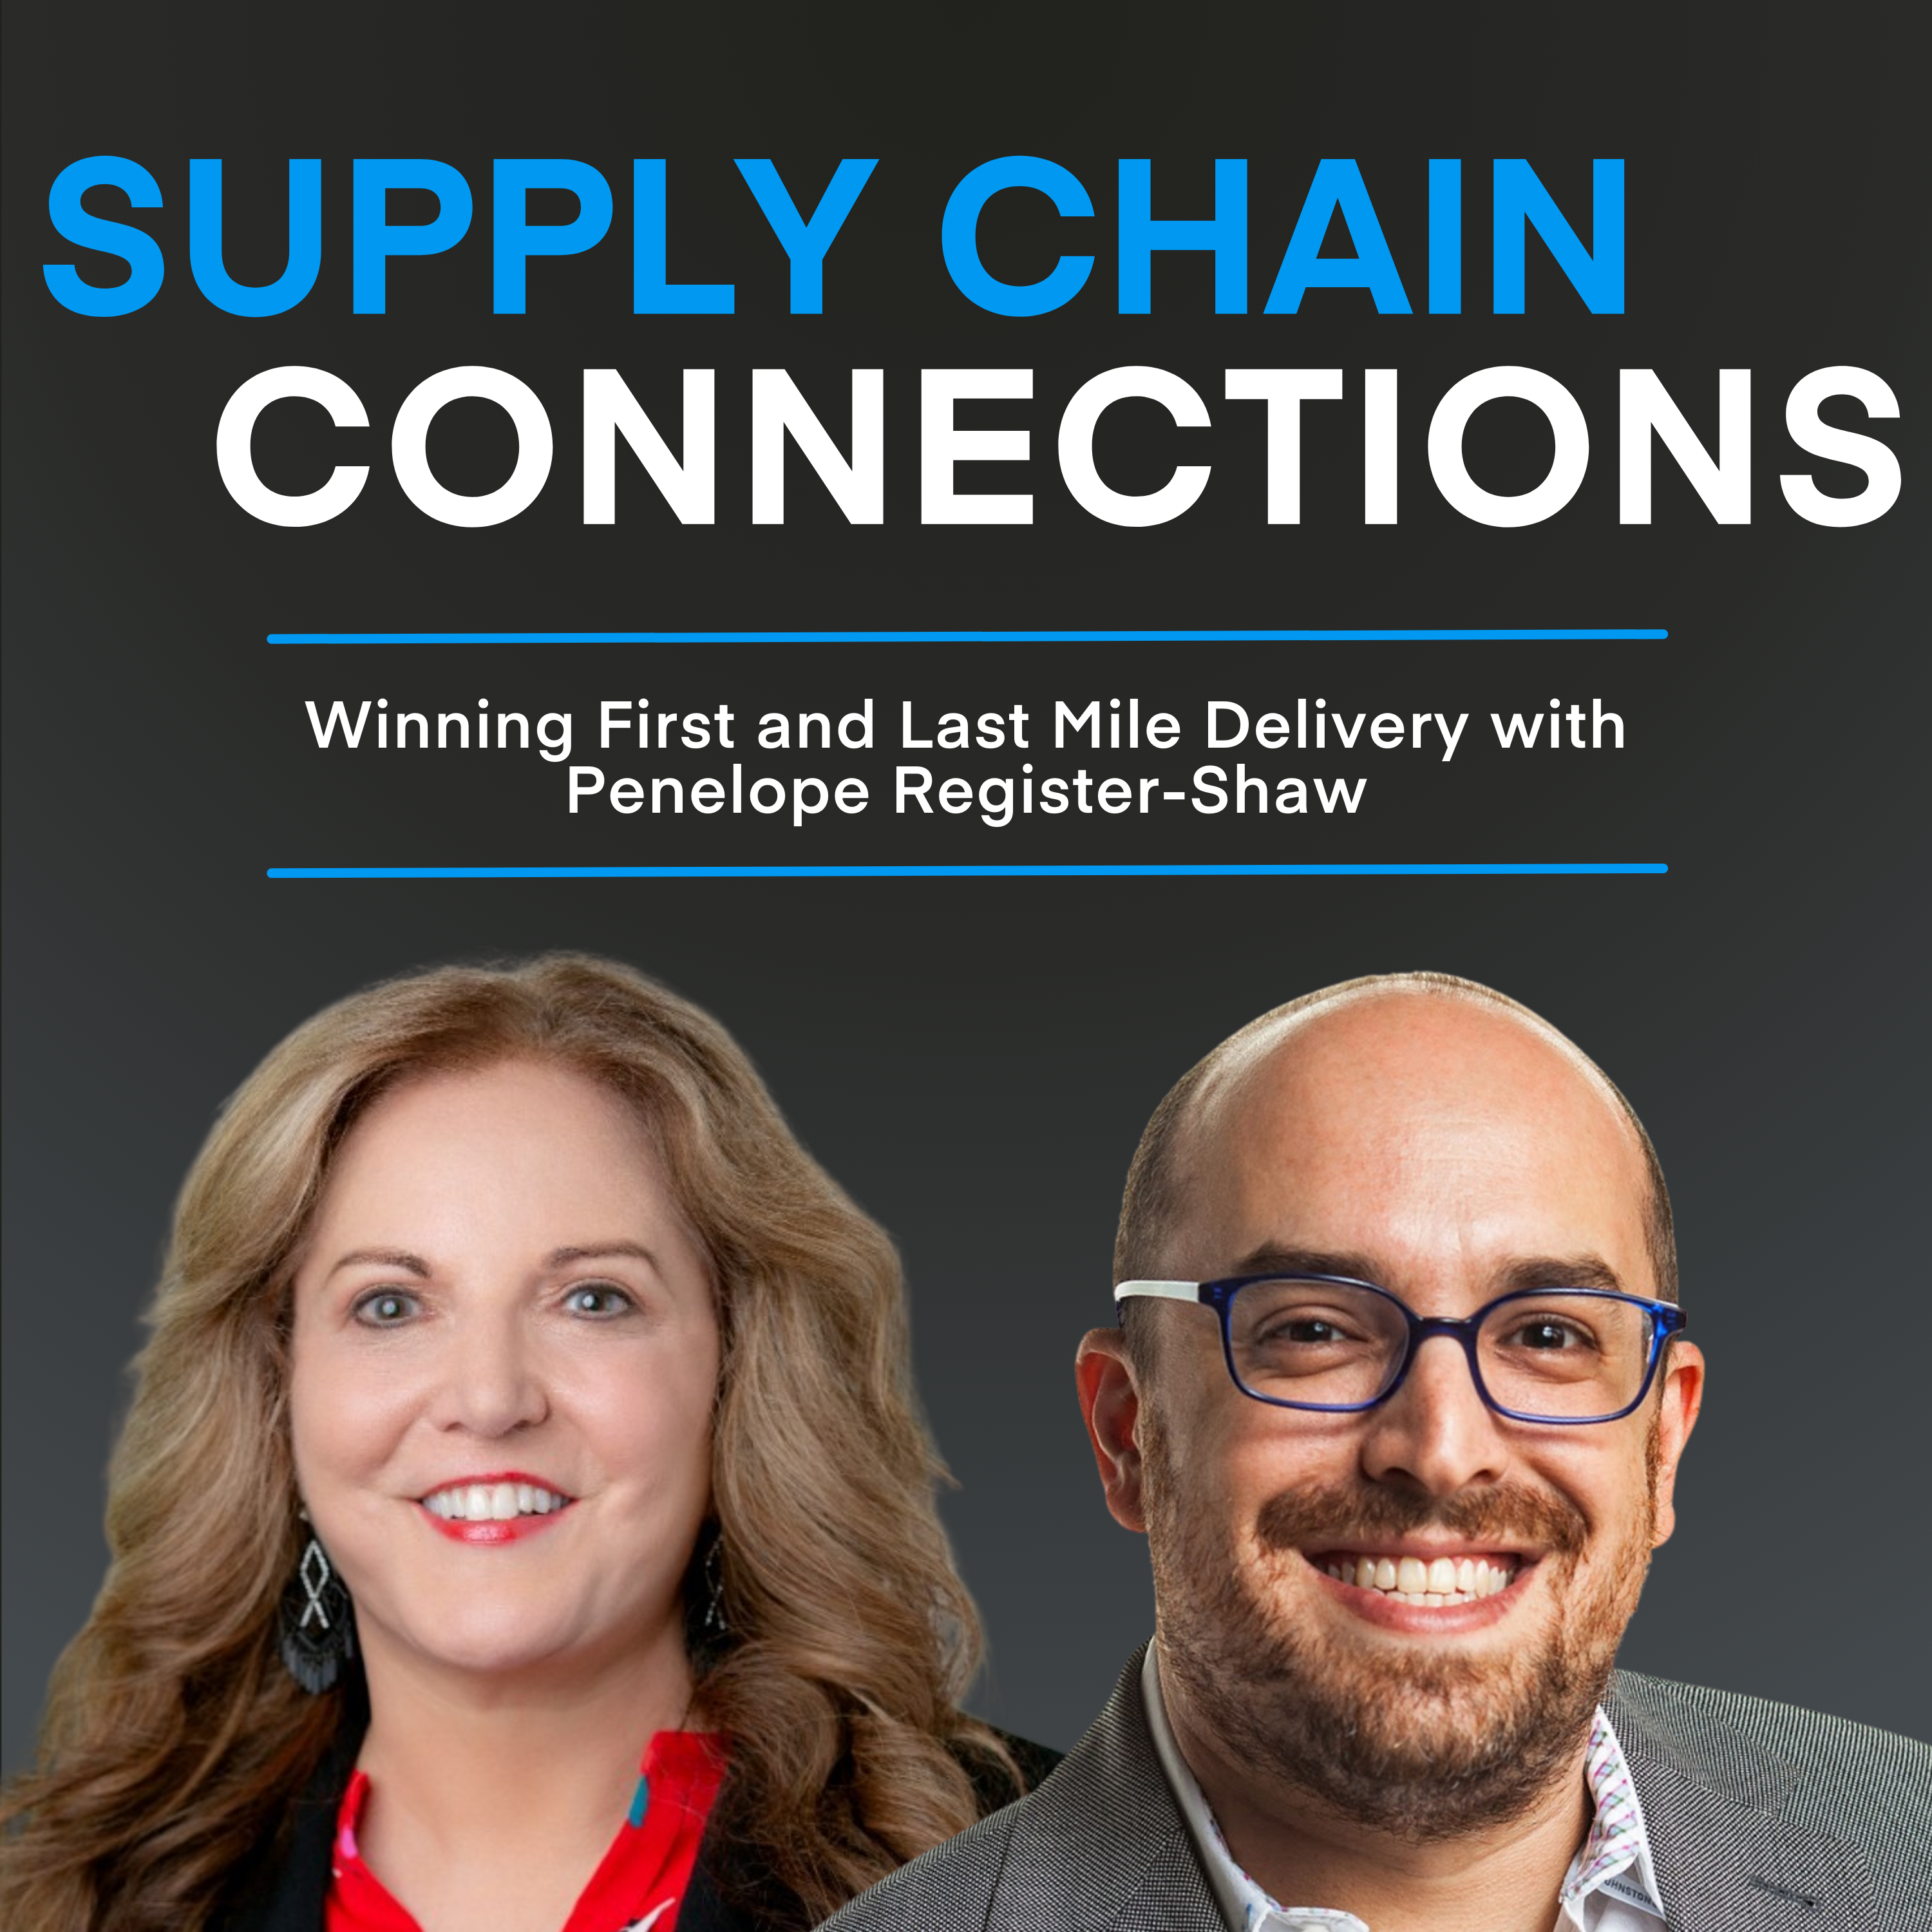 Winning First and Last Mile Delivery with Penelope Register-Shaw